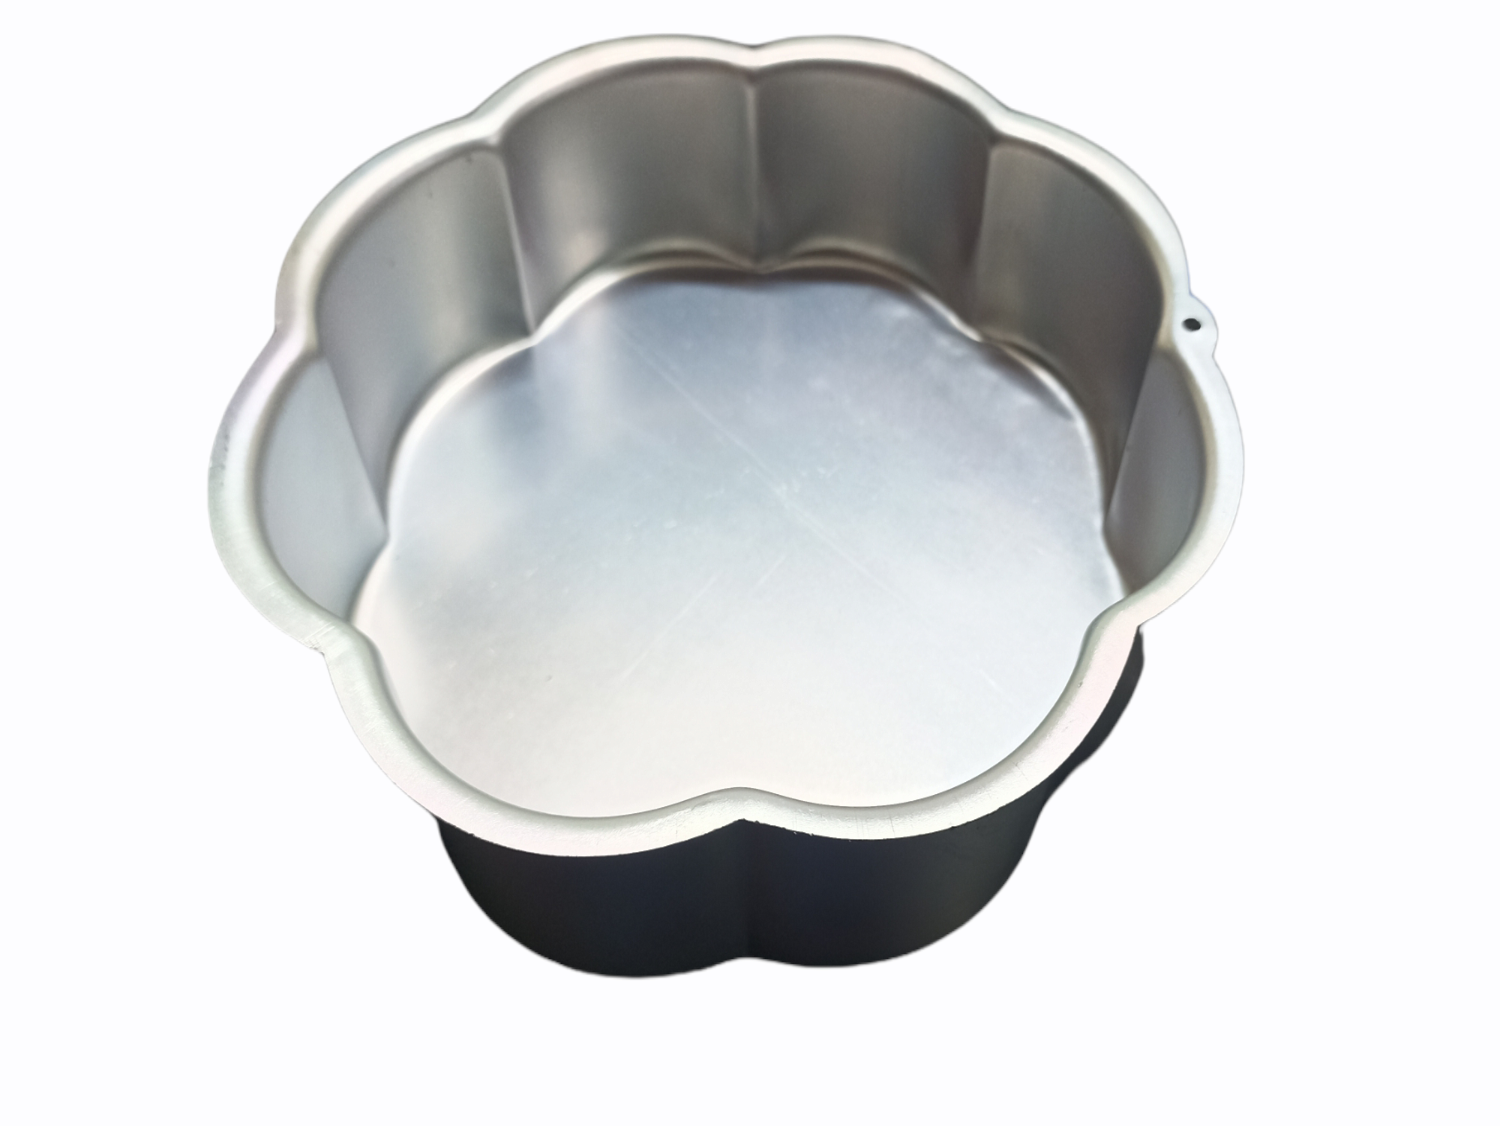 Buy Sonder Hard-Anodized Aluminum Cake Pot- Silver Online at Low Prices in  India - Amazon.in